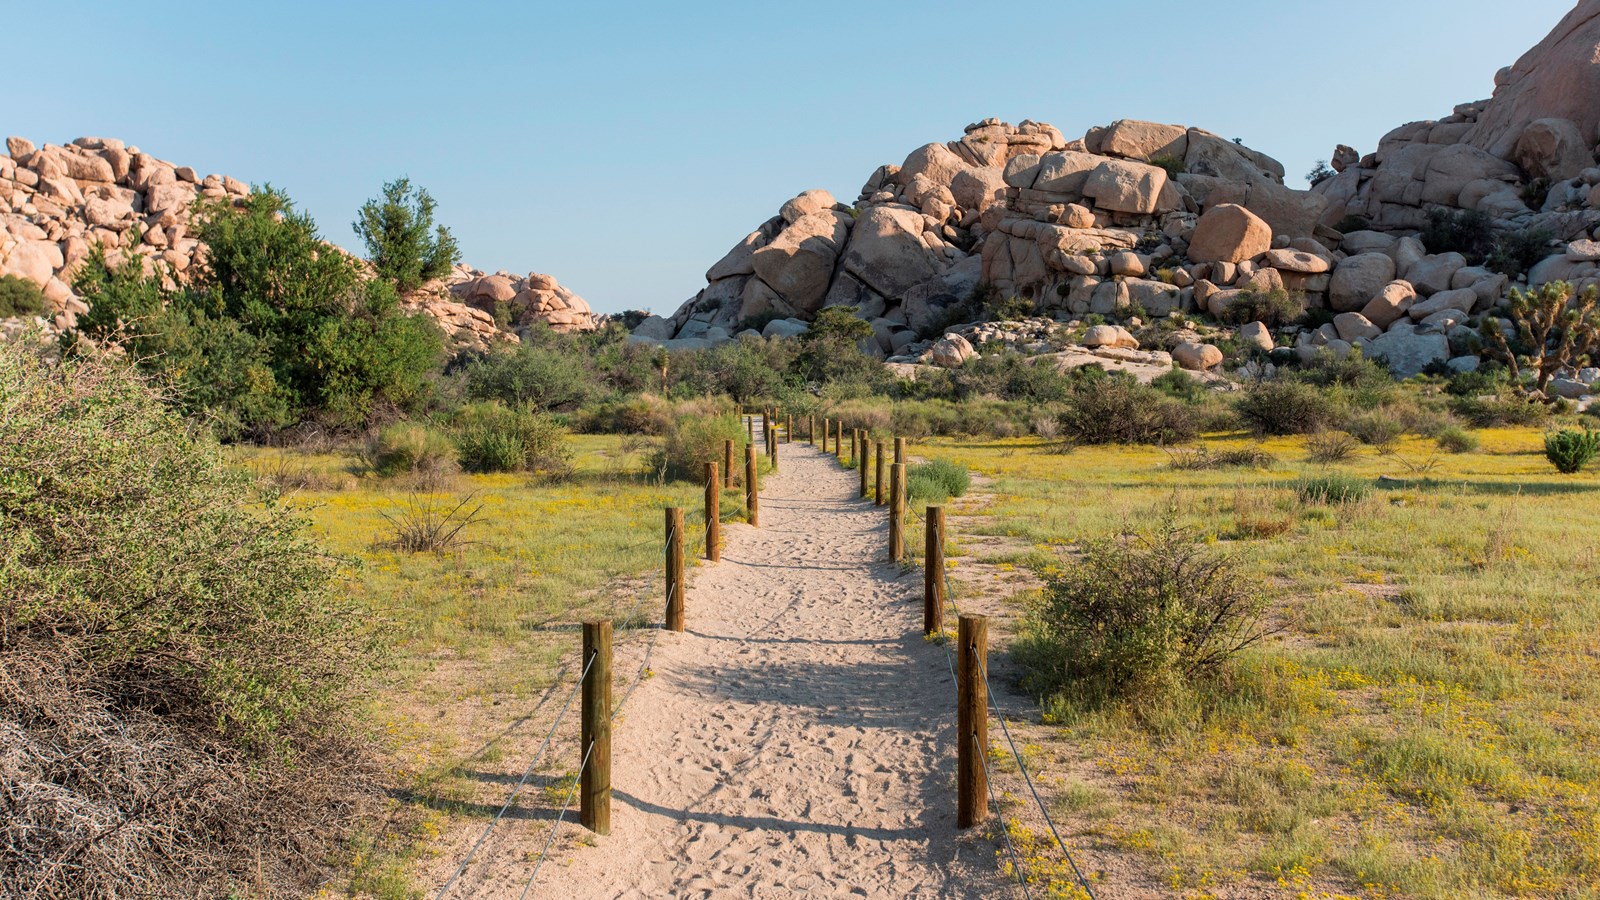 A dirt trail with wooden posts on either side leading towards rock formations in the distance.